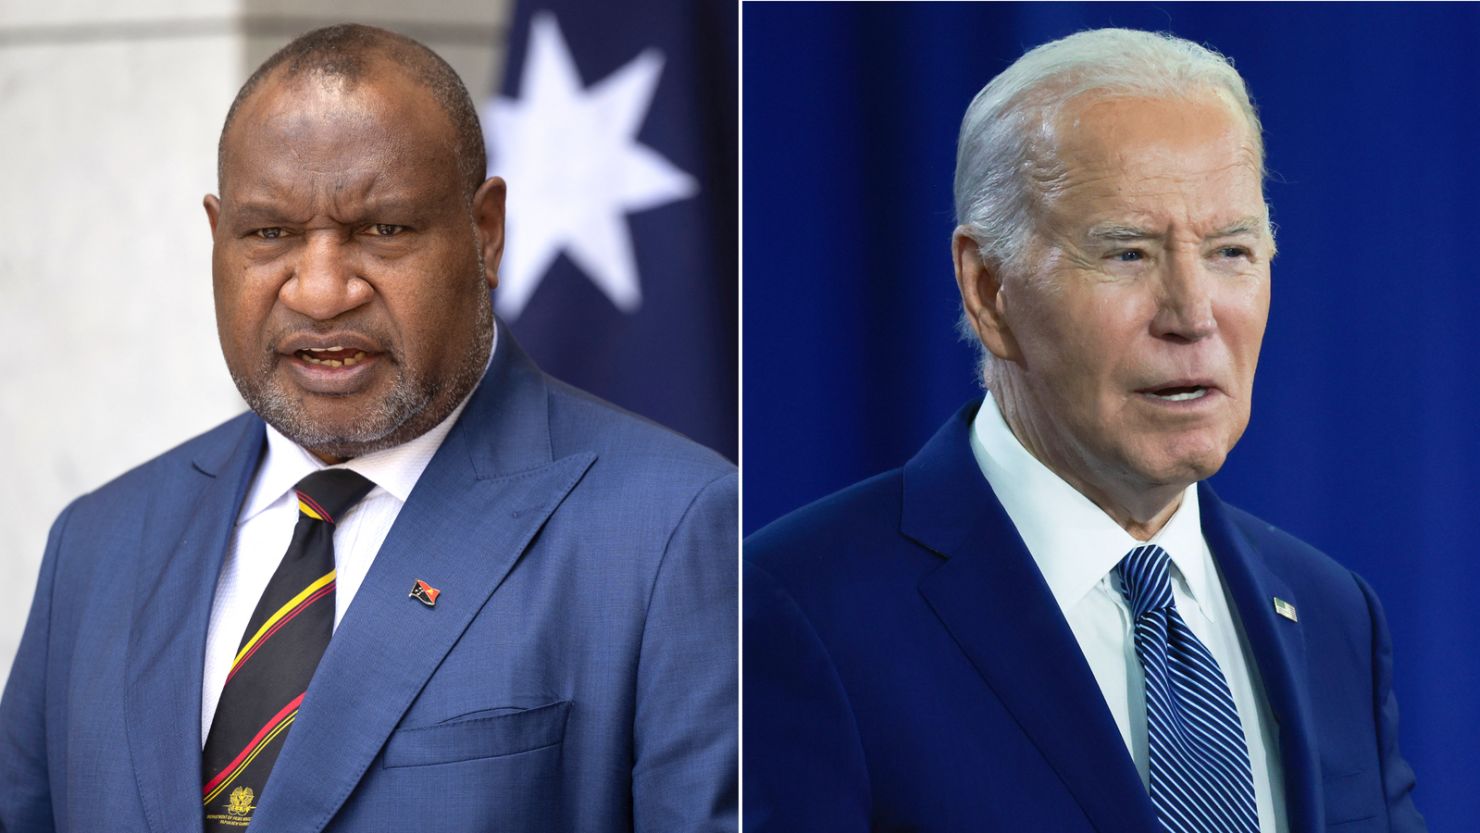 Papua New Guinea Prime Minister James Marape has pushed back against US President Joe Biden's recent remarks about cannibalism in the Pacific during World War II.